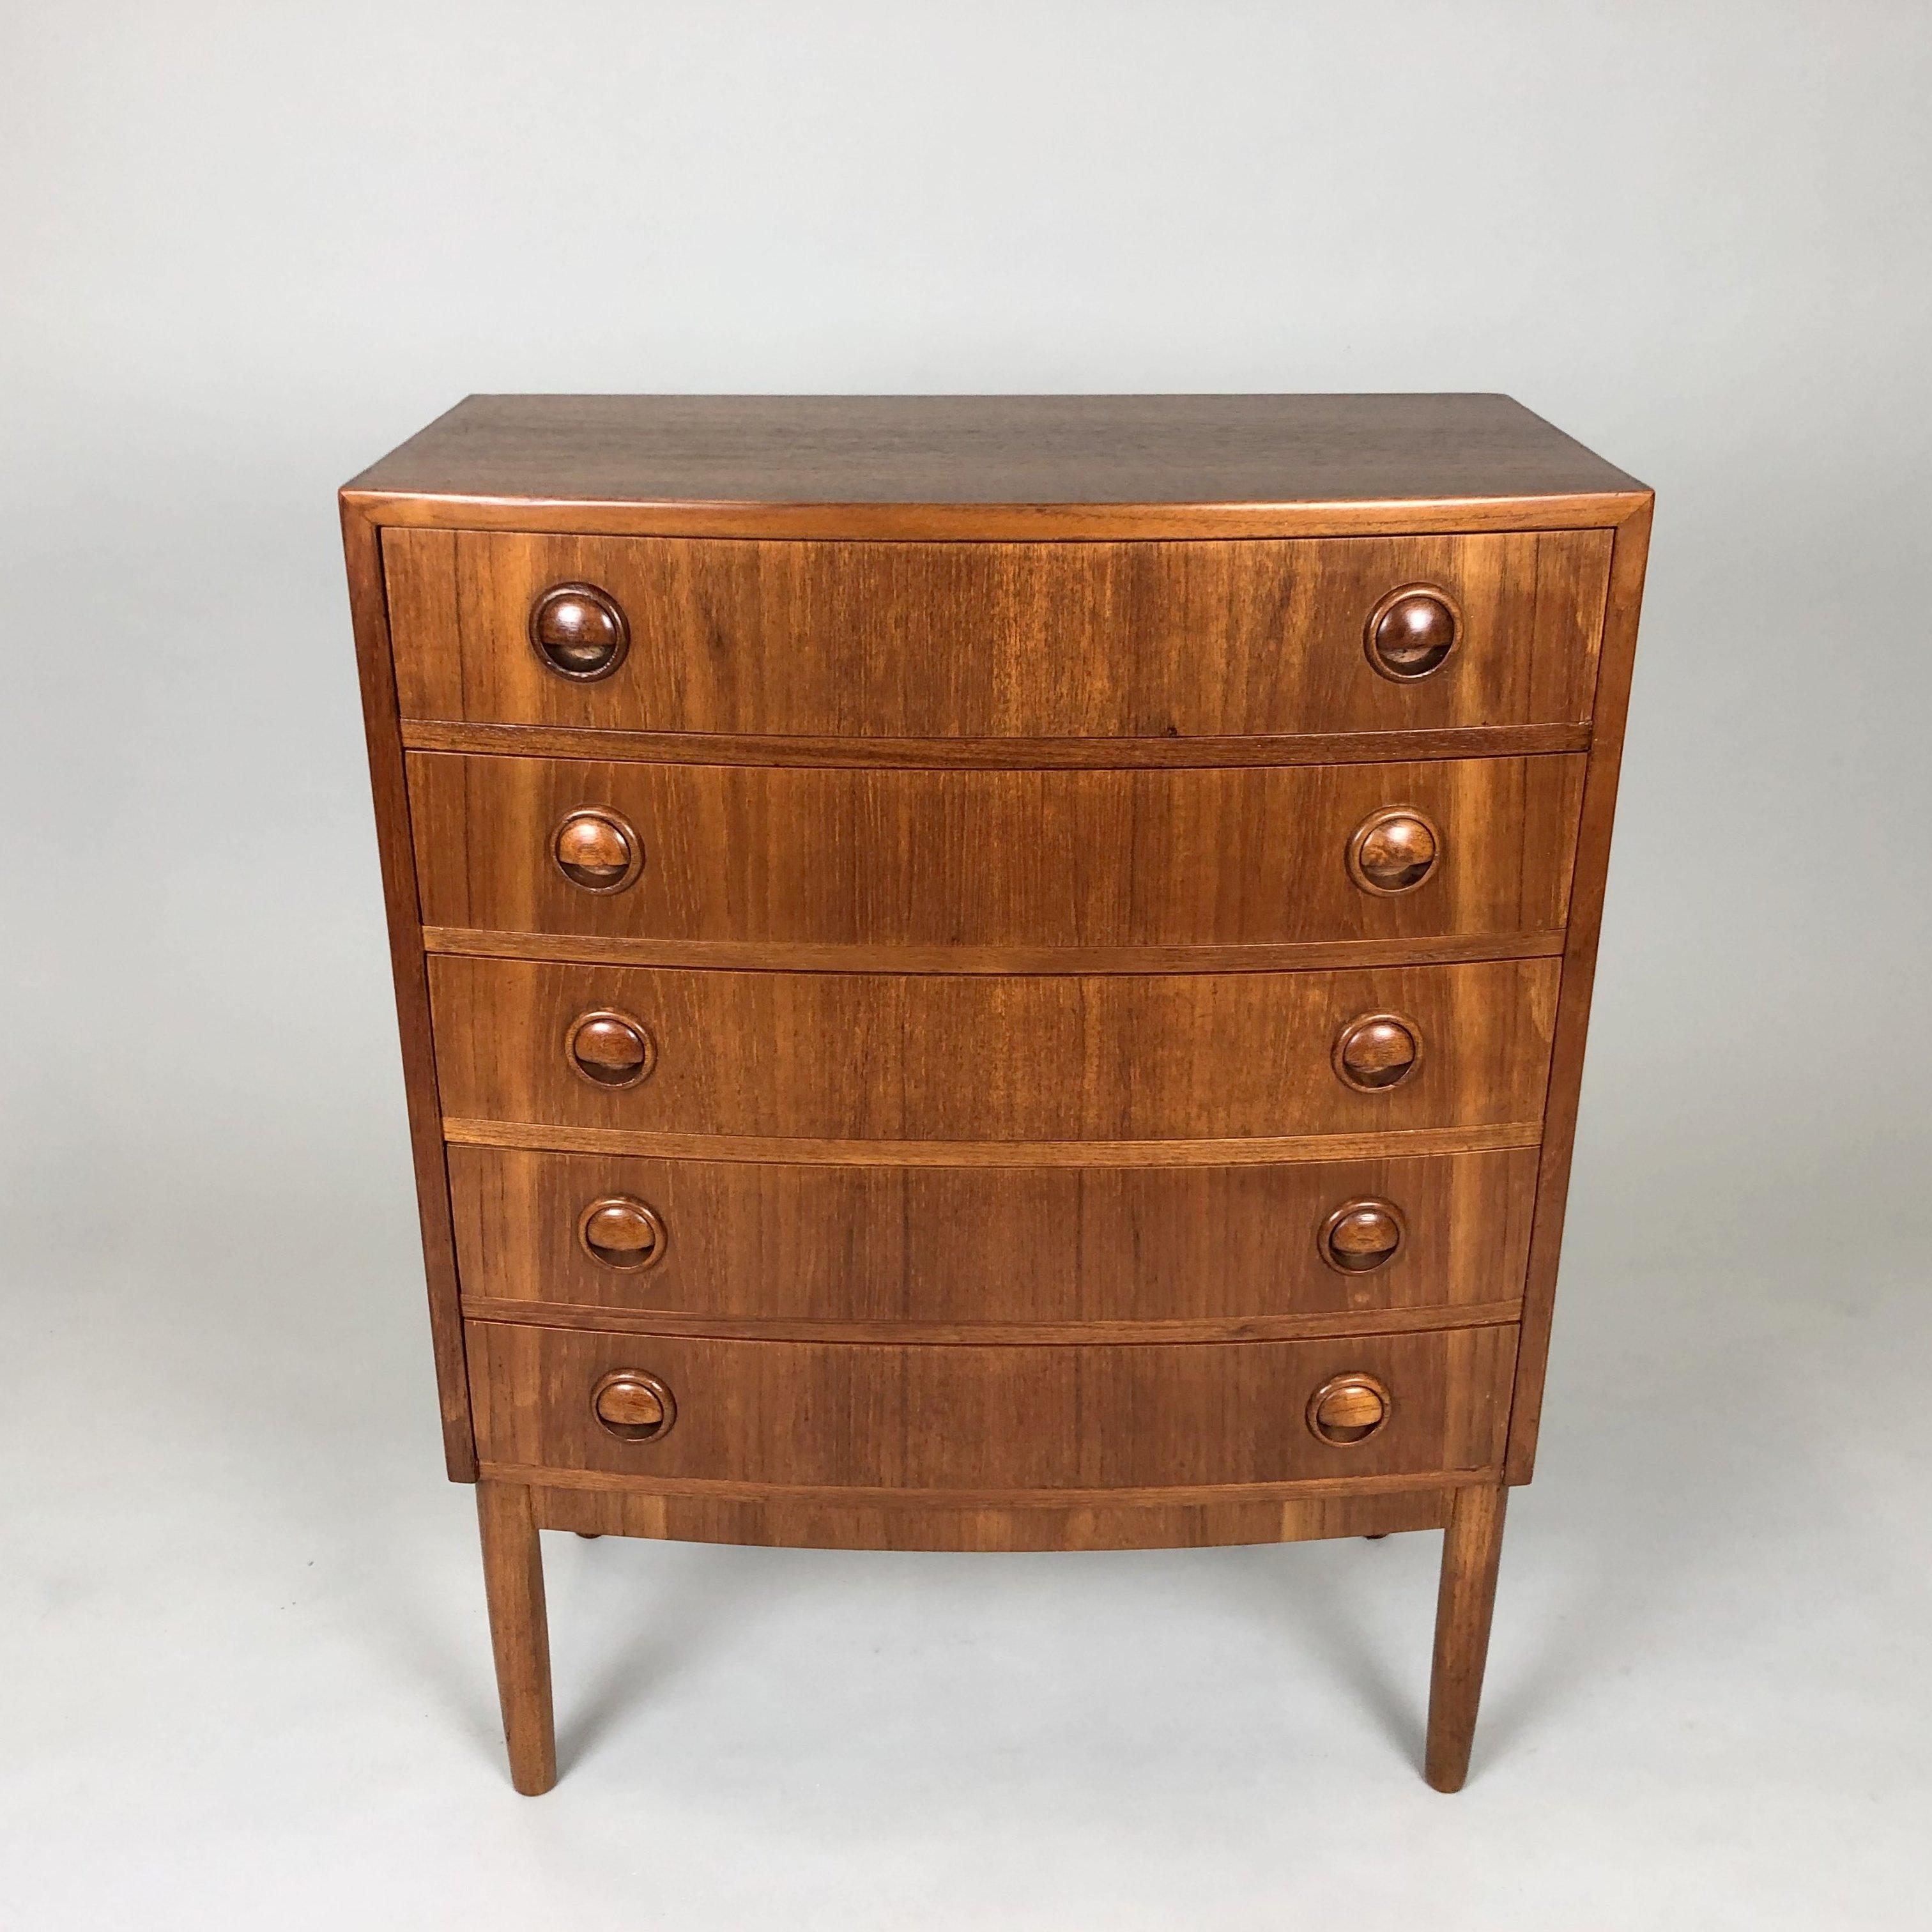 Refurbished chest of 5 drawers, designed in Denmark in the 1960s.